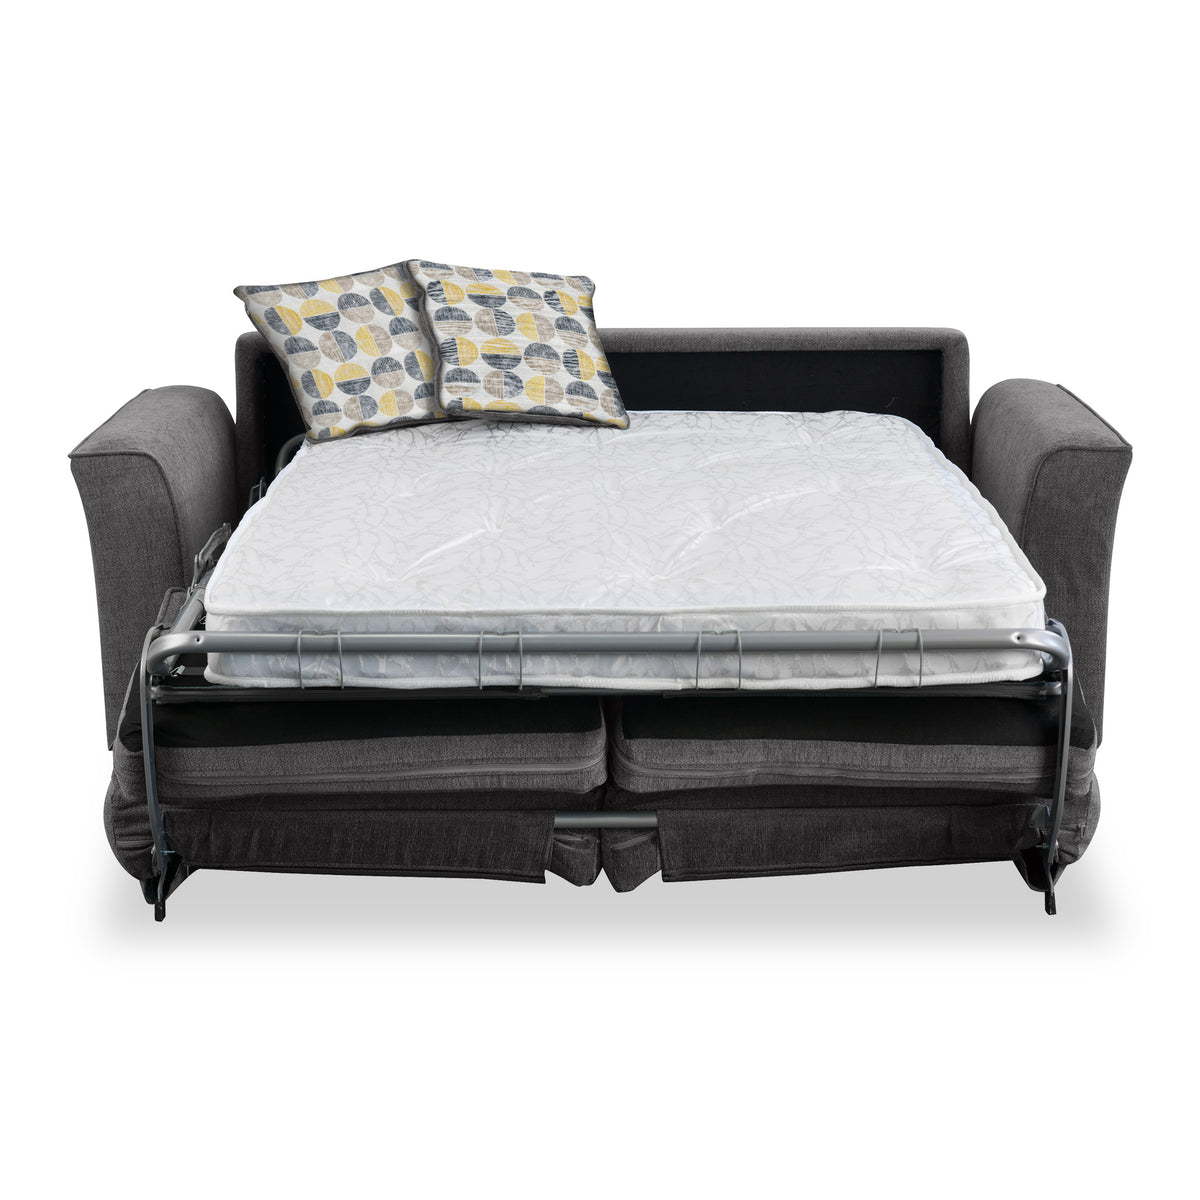 Boston 2 Seater Sofabed in Charcoal with Rufus Beige Cushions by Roseland Furniture